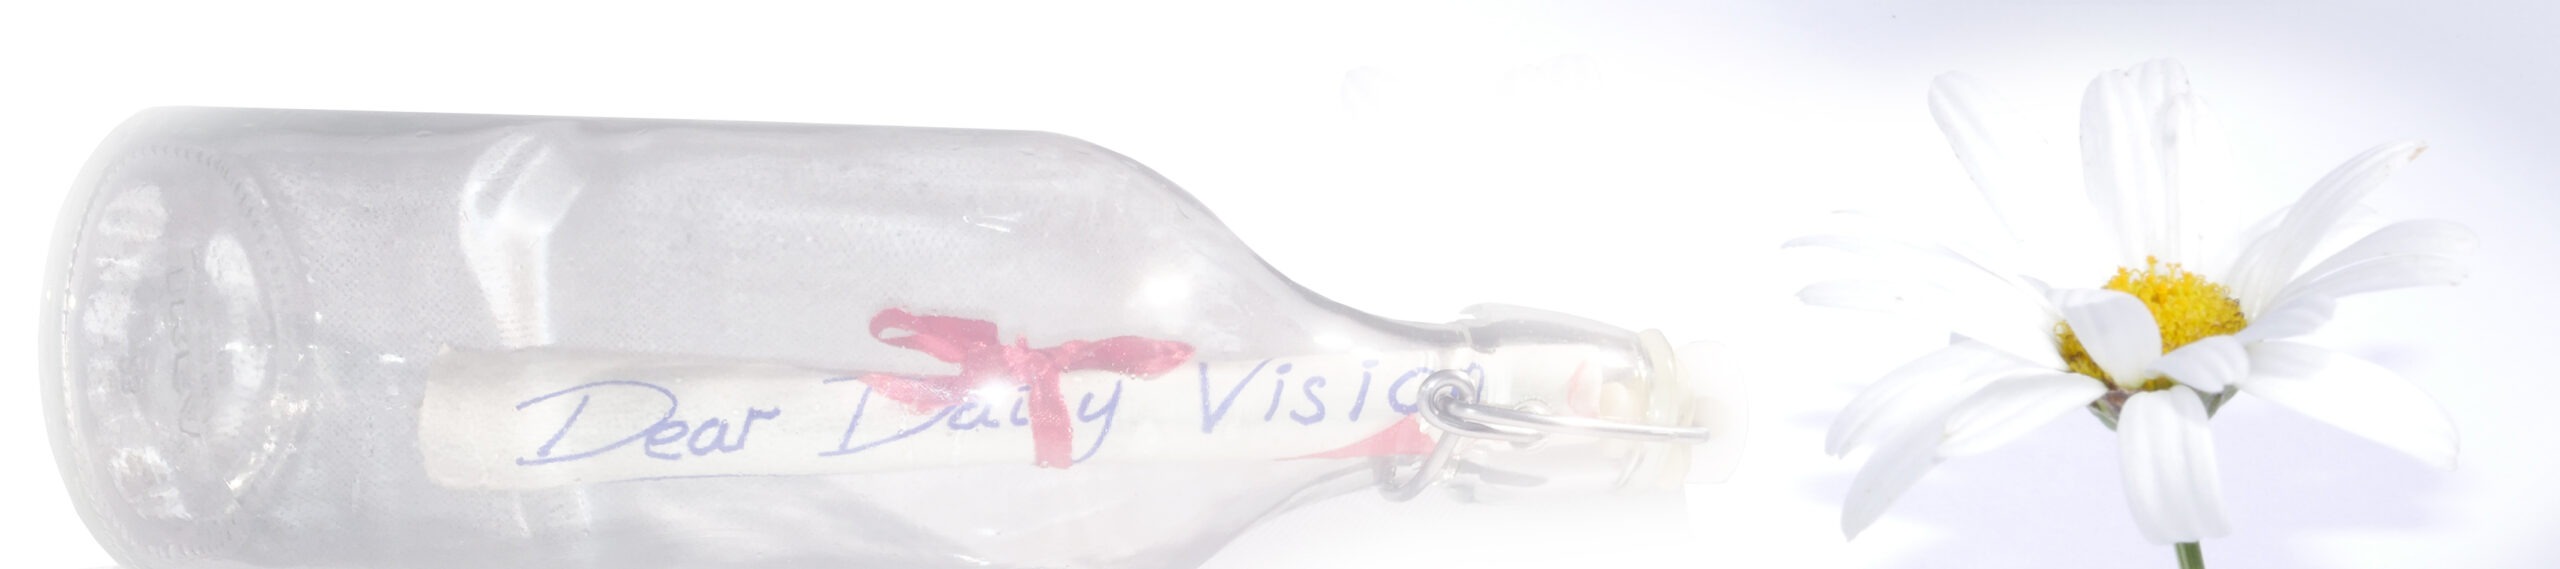 Message in a bottle - email counselling with Daisy Vision